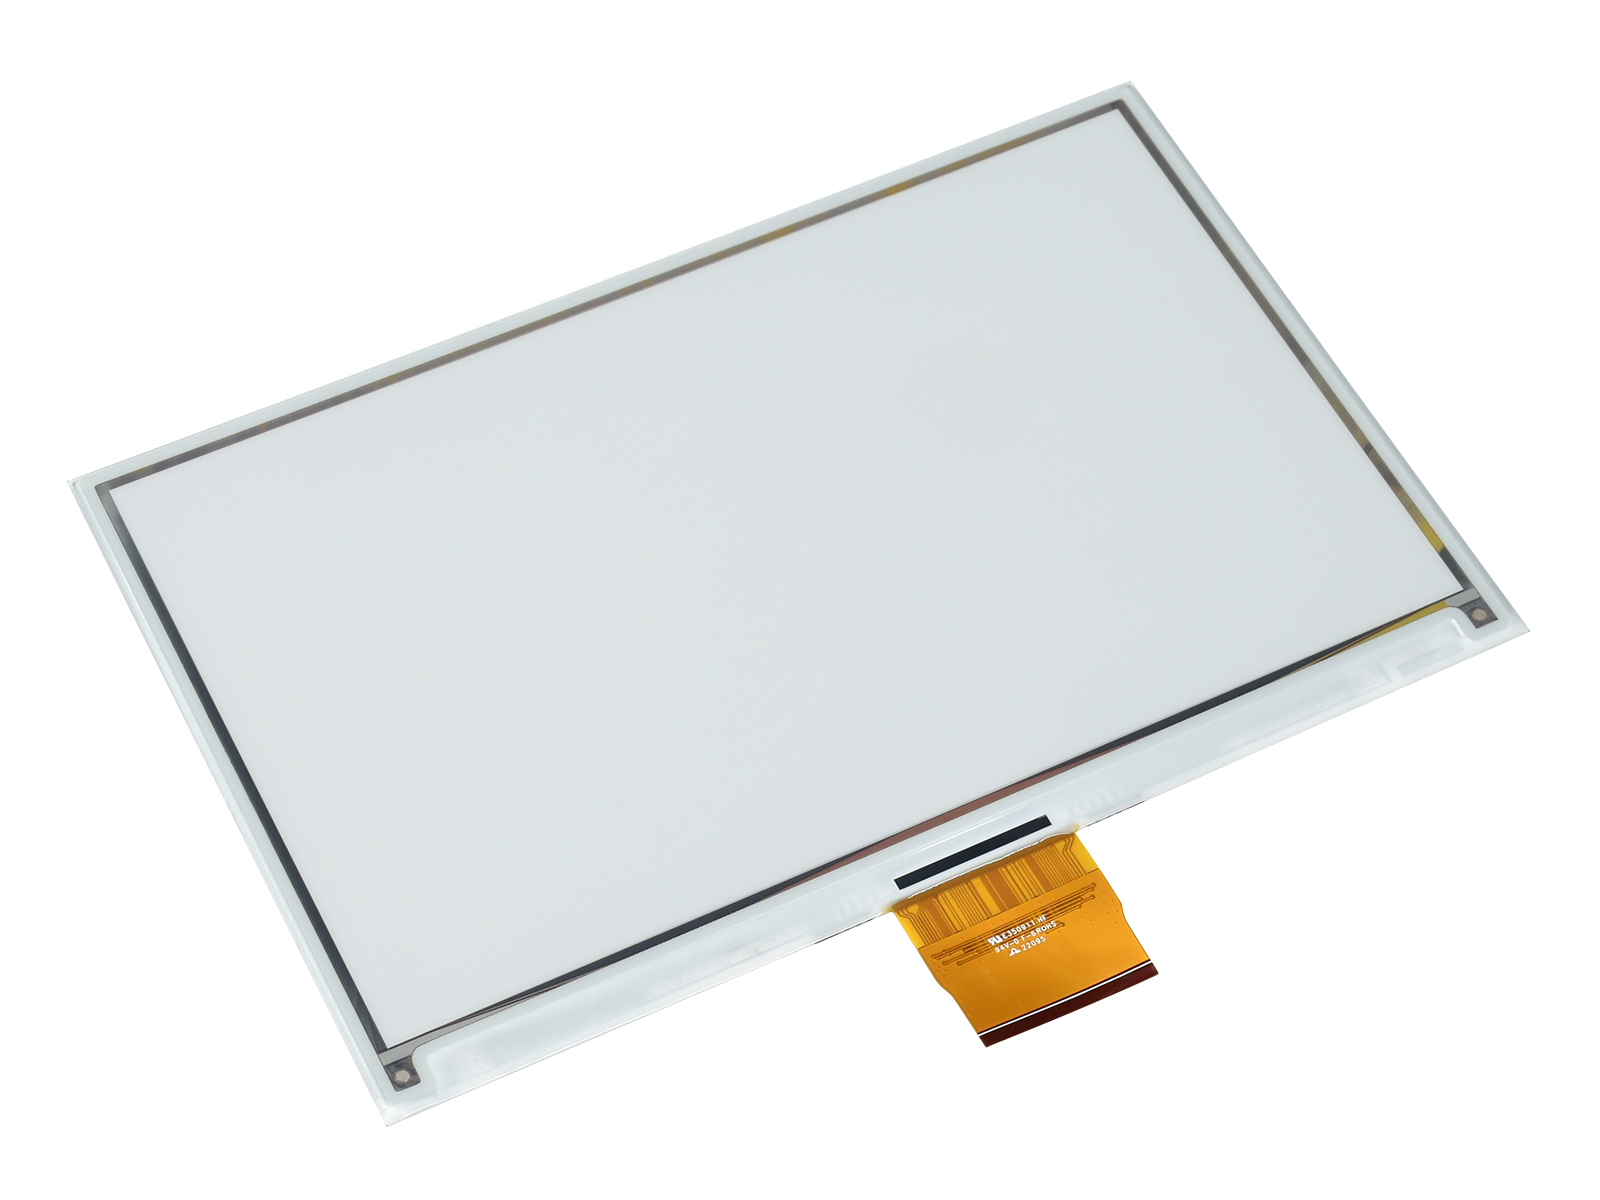 7.3inch e-Paper (G) raw display, 800 * 480, SPI Interface